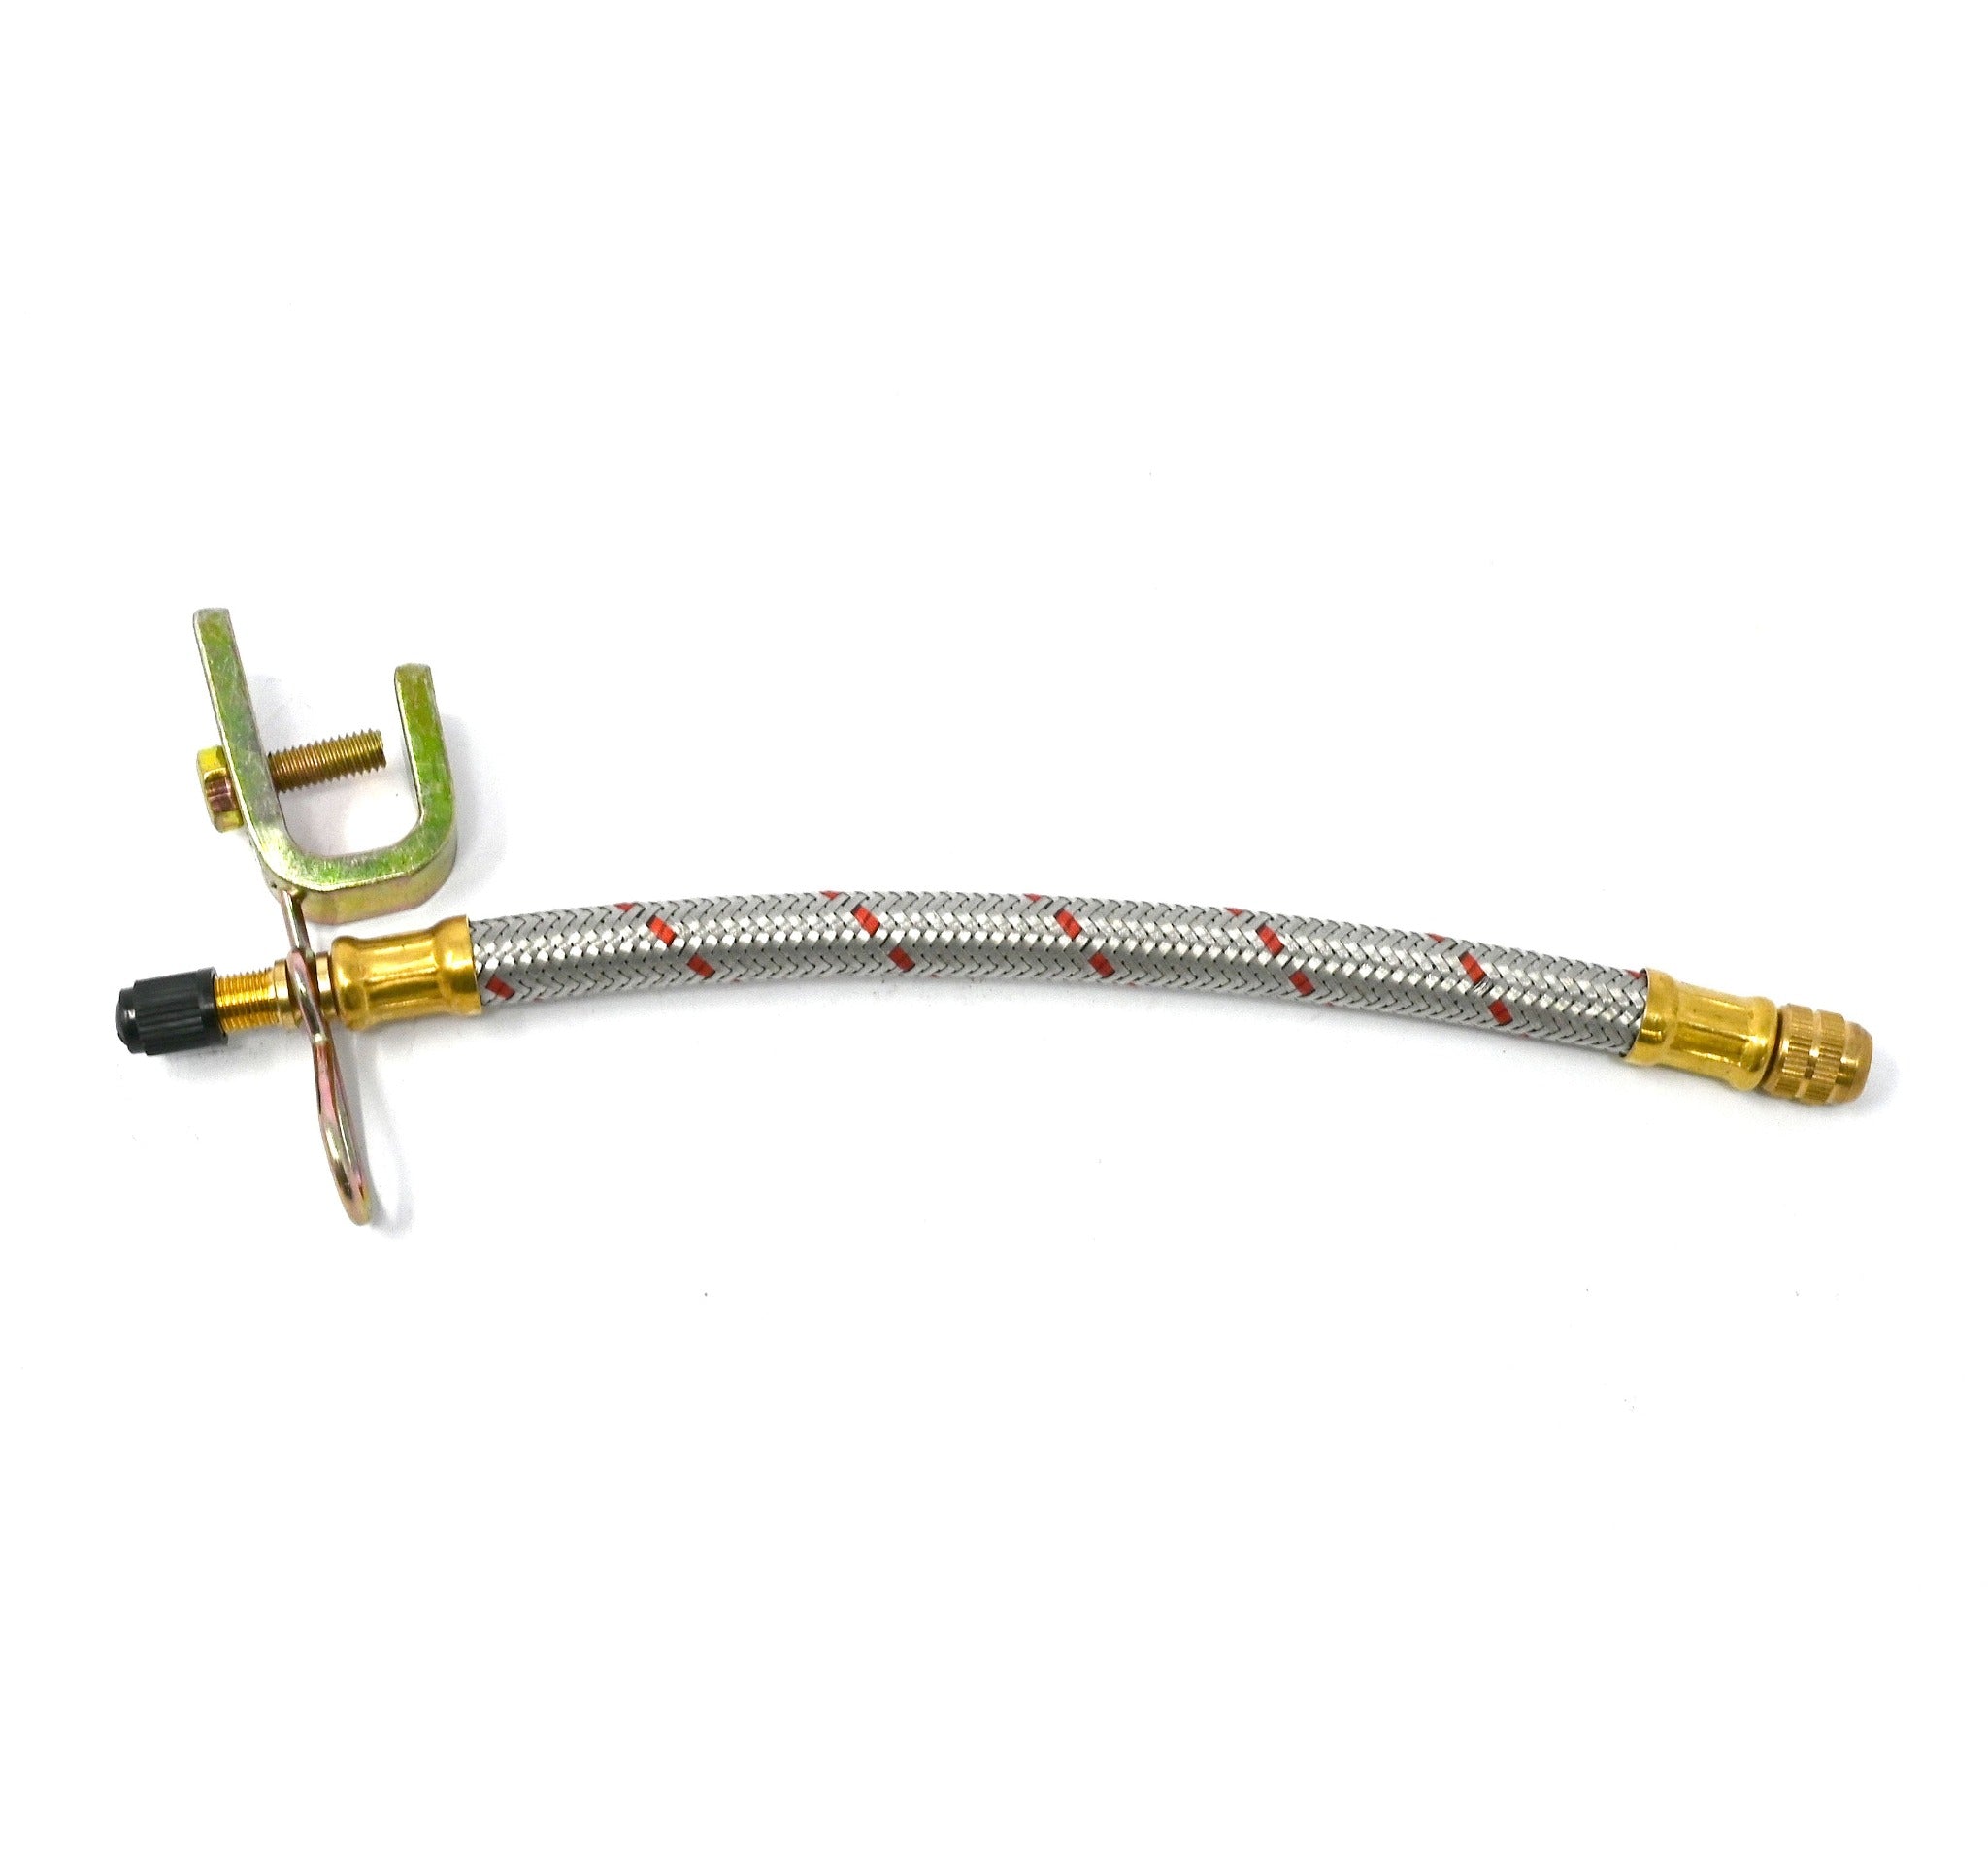 Flexible Braided Metal Rubber Valve Extension - 8.25 Inches (210mm)